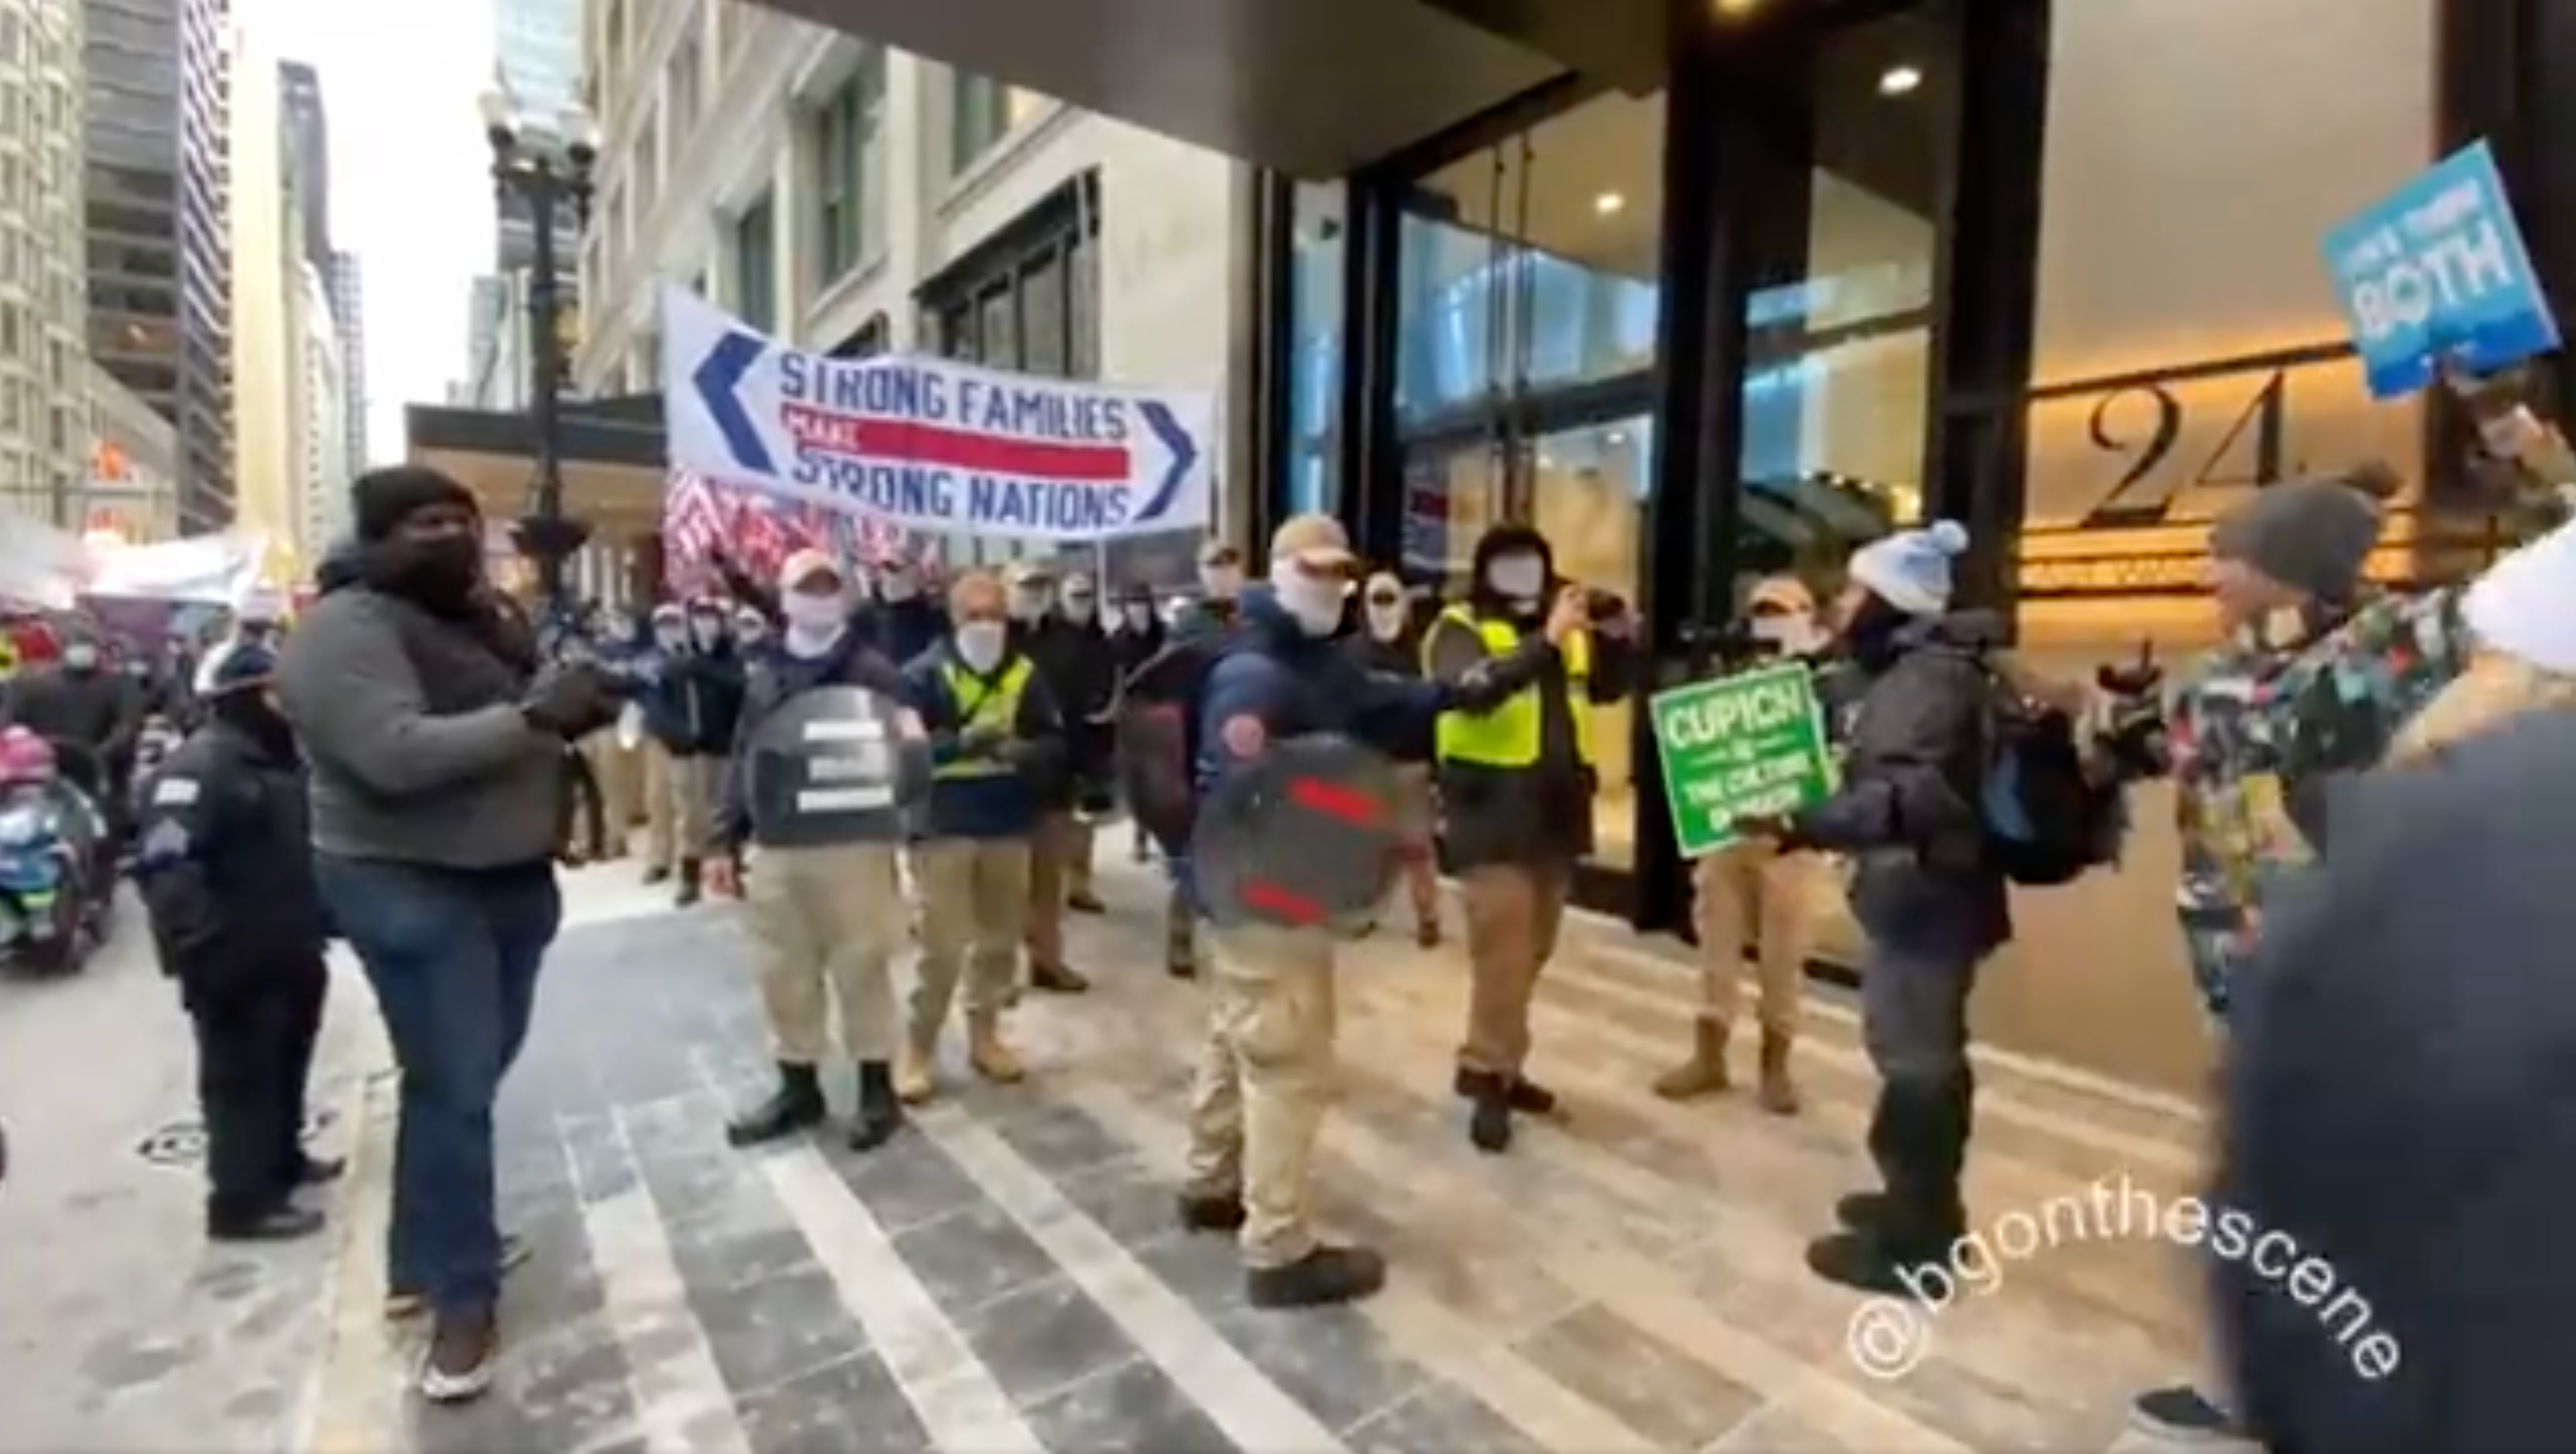 Anti-abortion protesters shouted at members of the white nationalist group Patriot Front in Chicago